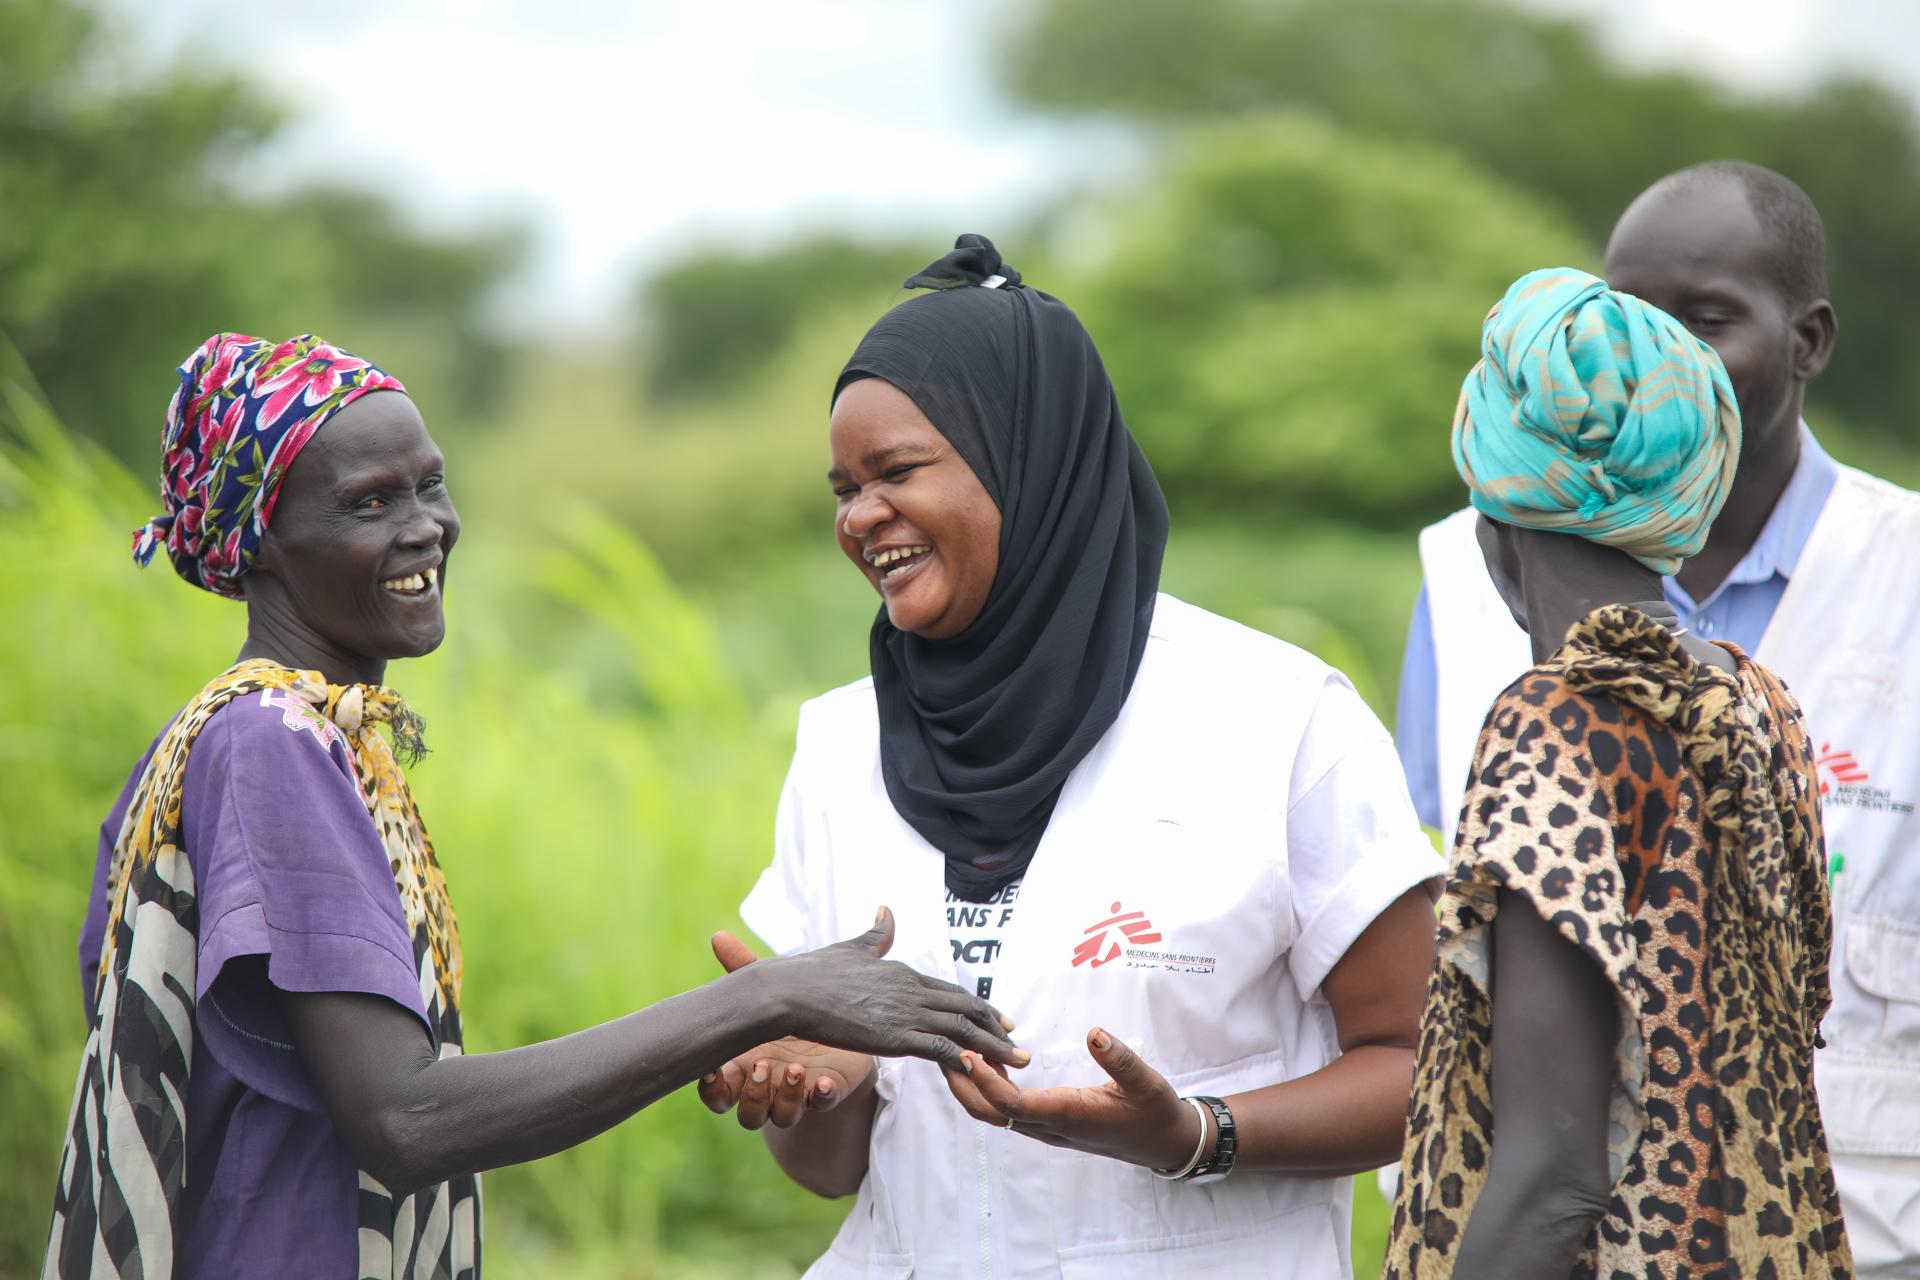 MSF Nurse Activity Manager for Abyei, Awa Abdumadou shares light moments with two community volunteers during a weekly visit to one of the 17 Integrated Community Case Management (ICCM) sites in Abyei